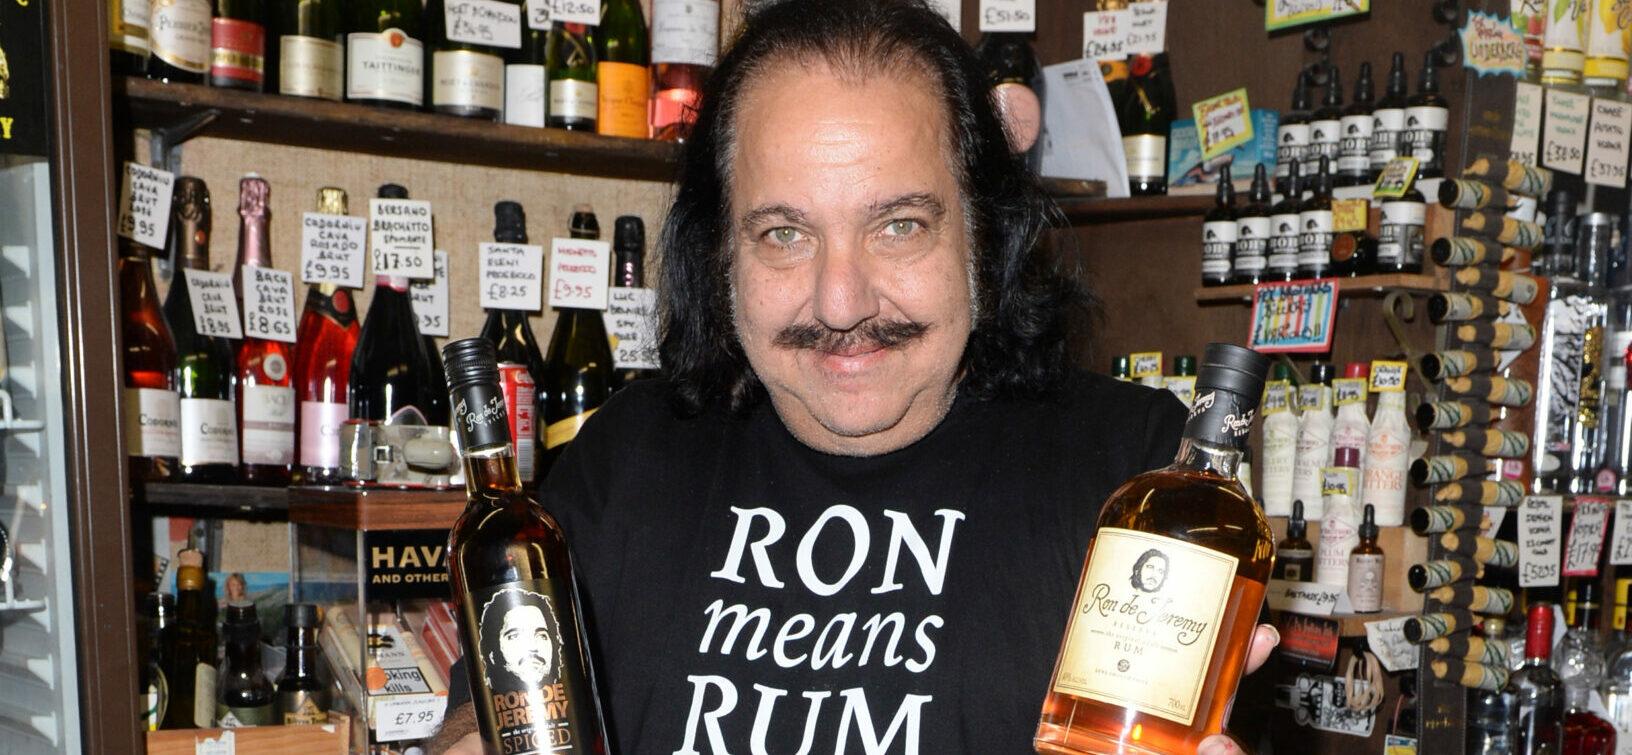 Conservatorship Filed for Ron Jeremy To Treat His Dementia